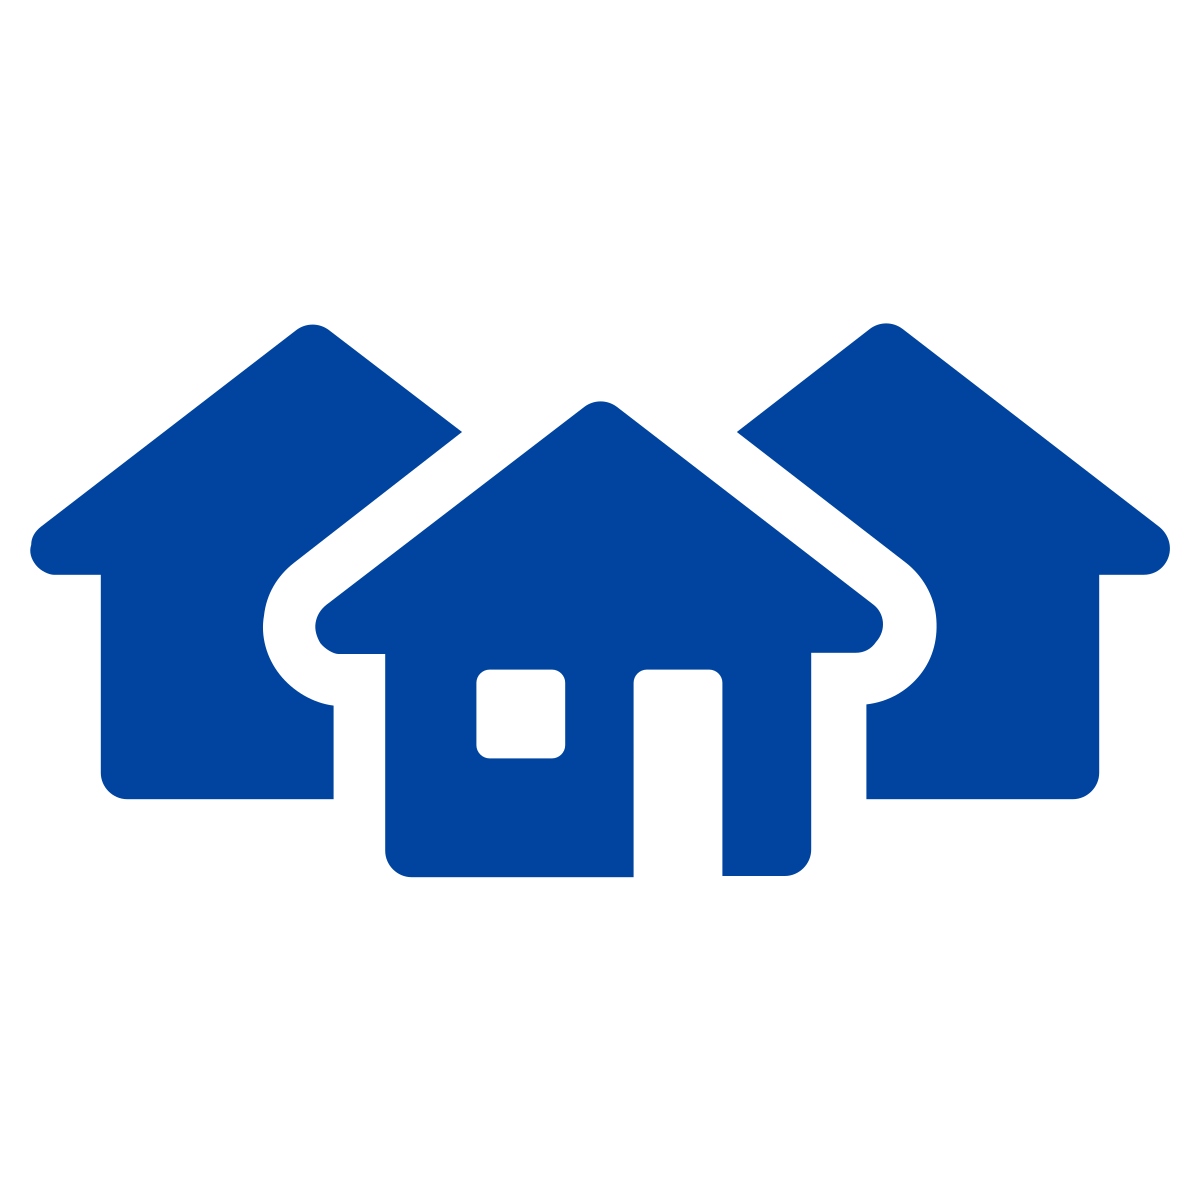 Blue icon of a group of houses.